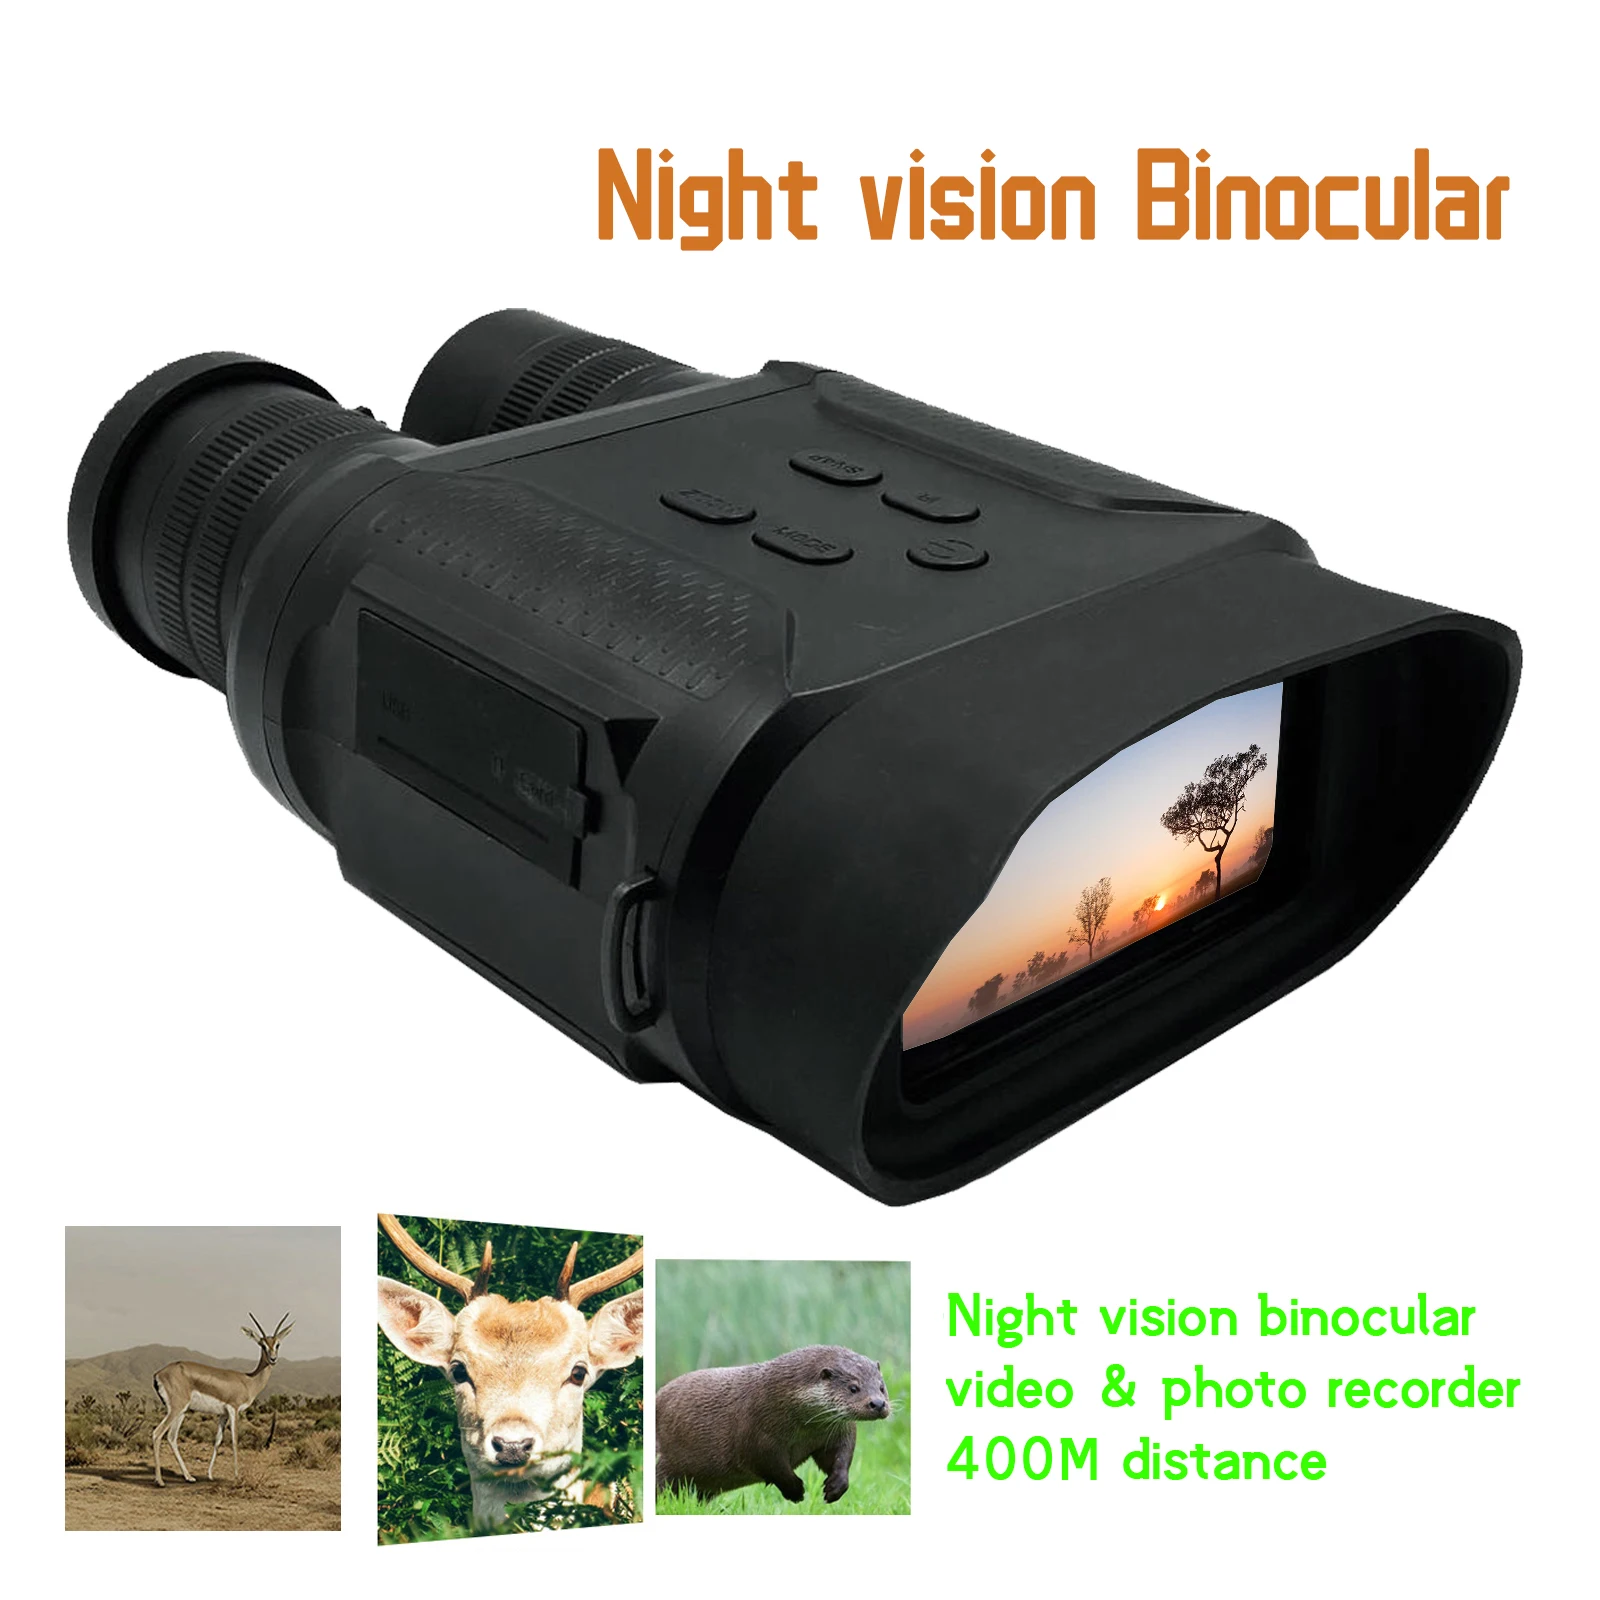 Day & Night Vision Infrared  Zoom Binocular Scope Telescope Device  1080P 400M Hunting Outdoor Travel Camping Camera